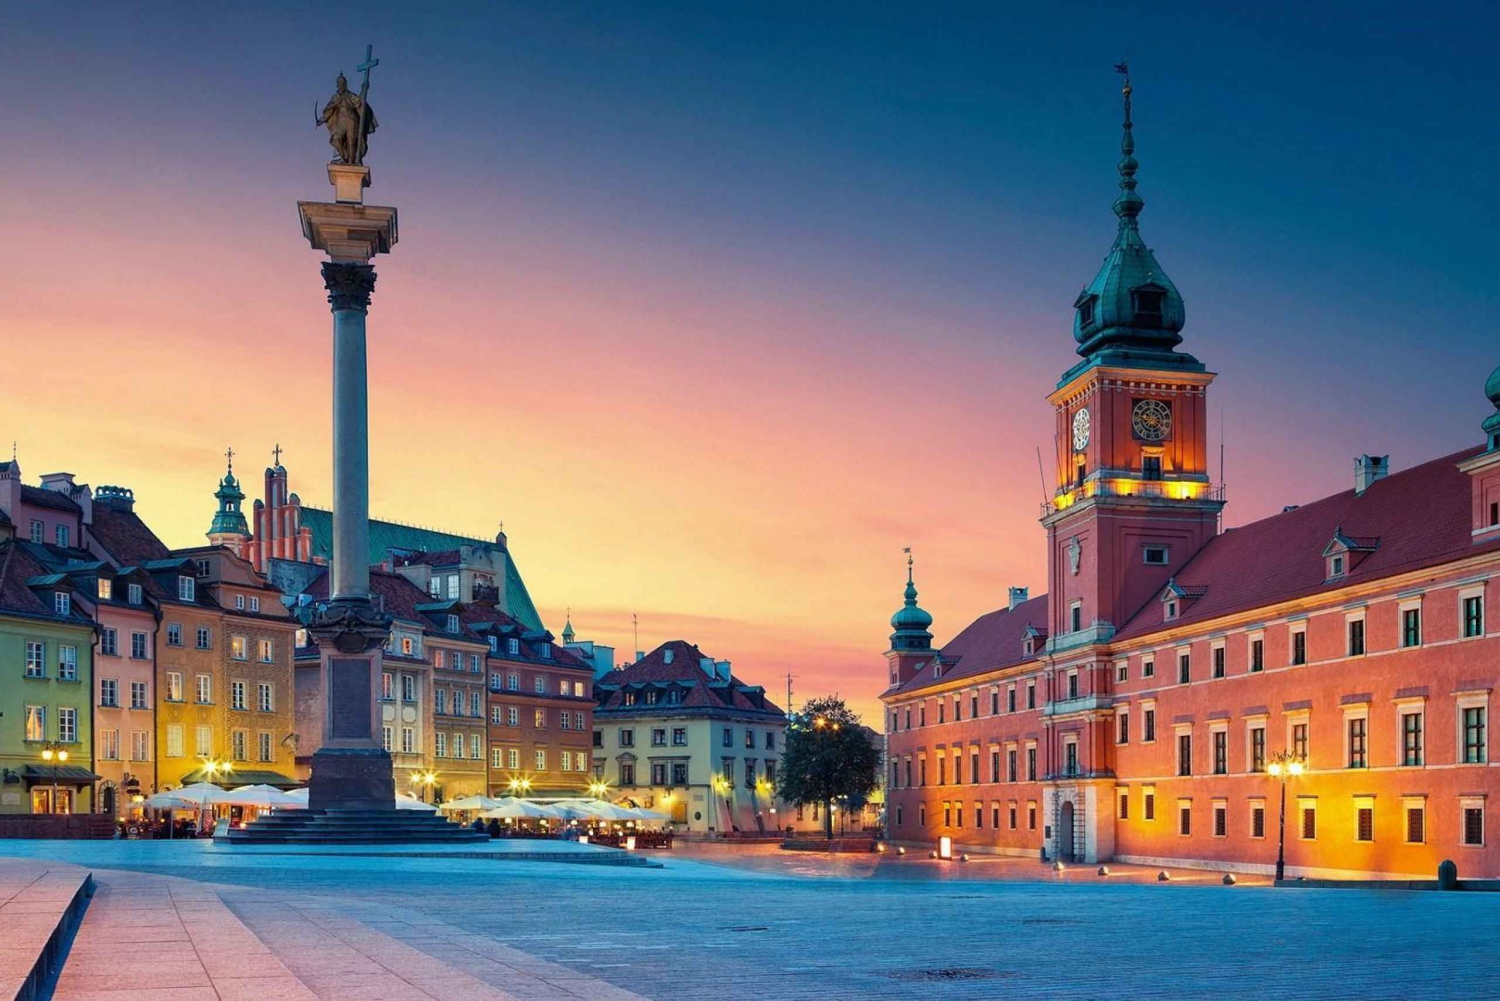 Warsaw: Old Town and Royal Castle Tour